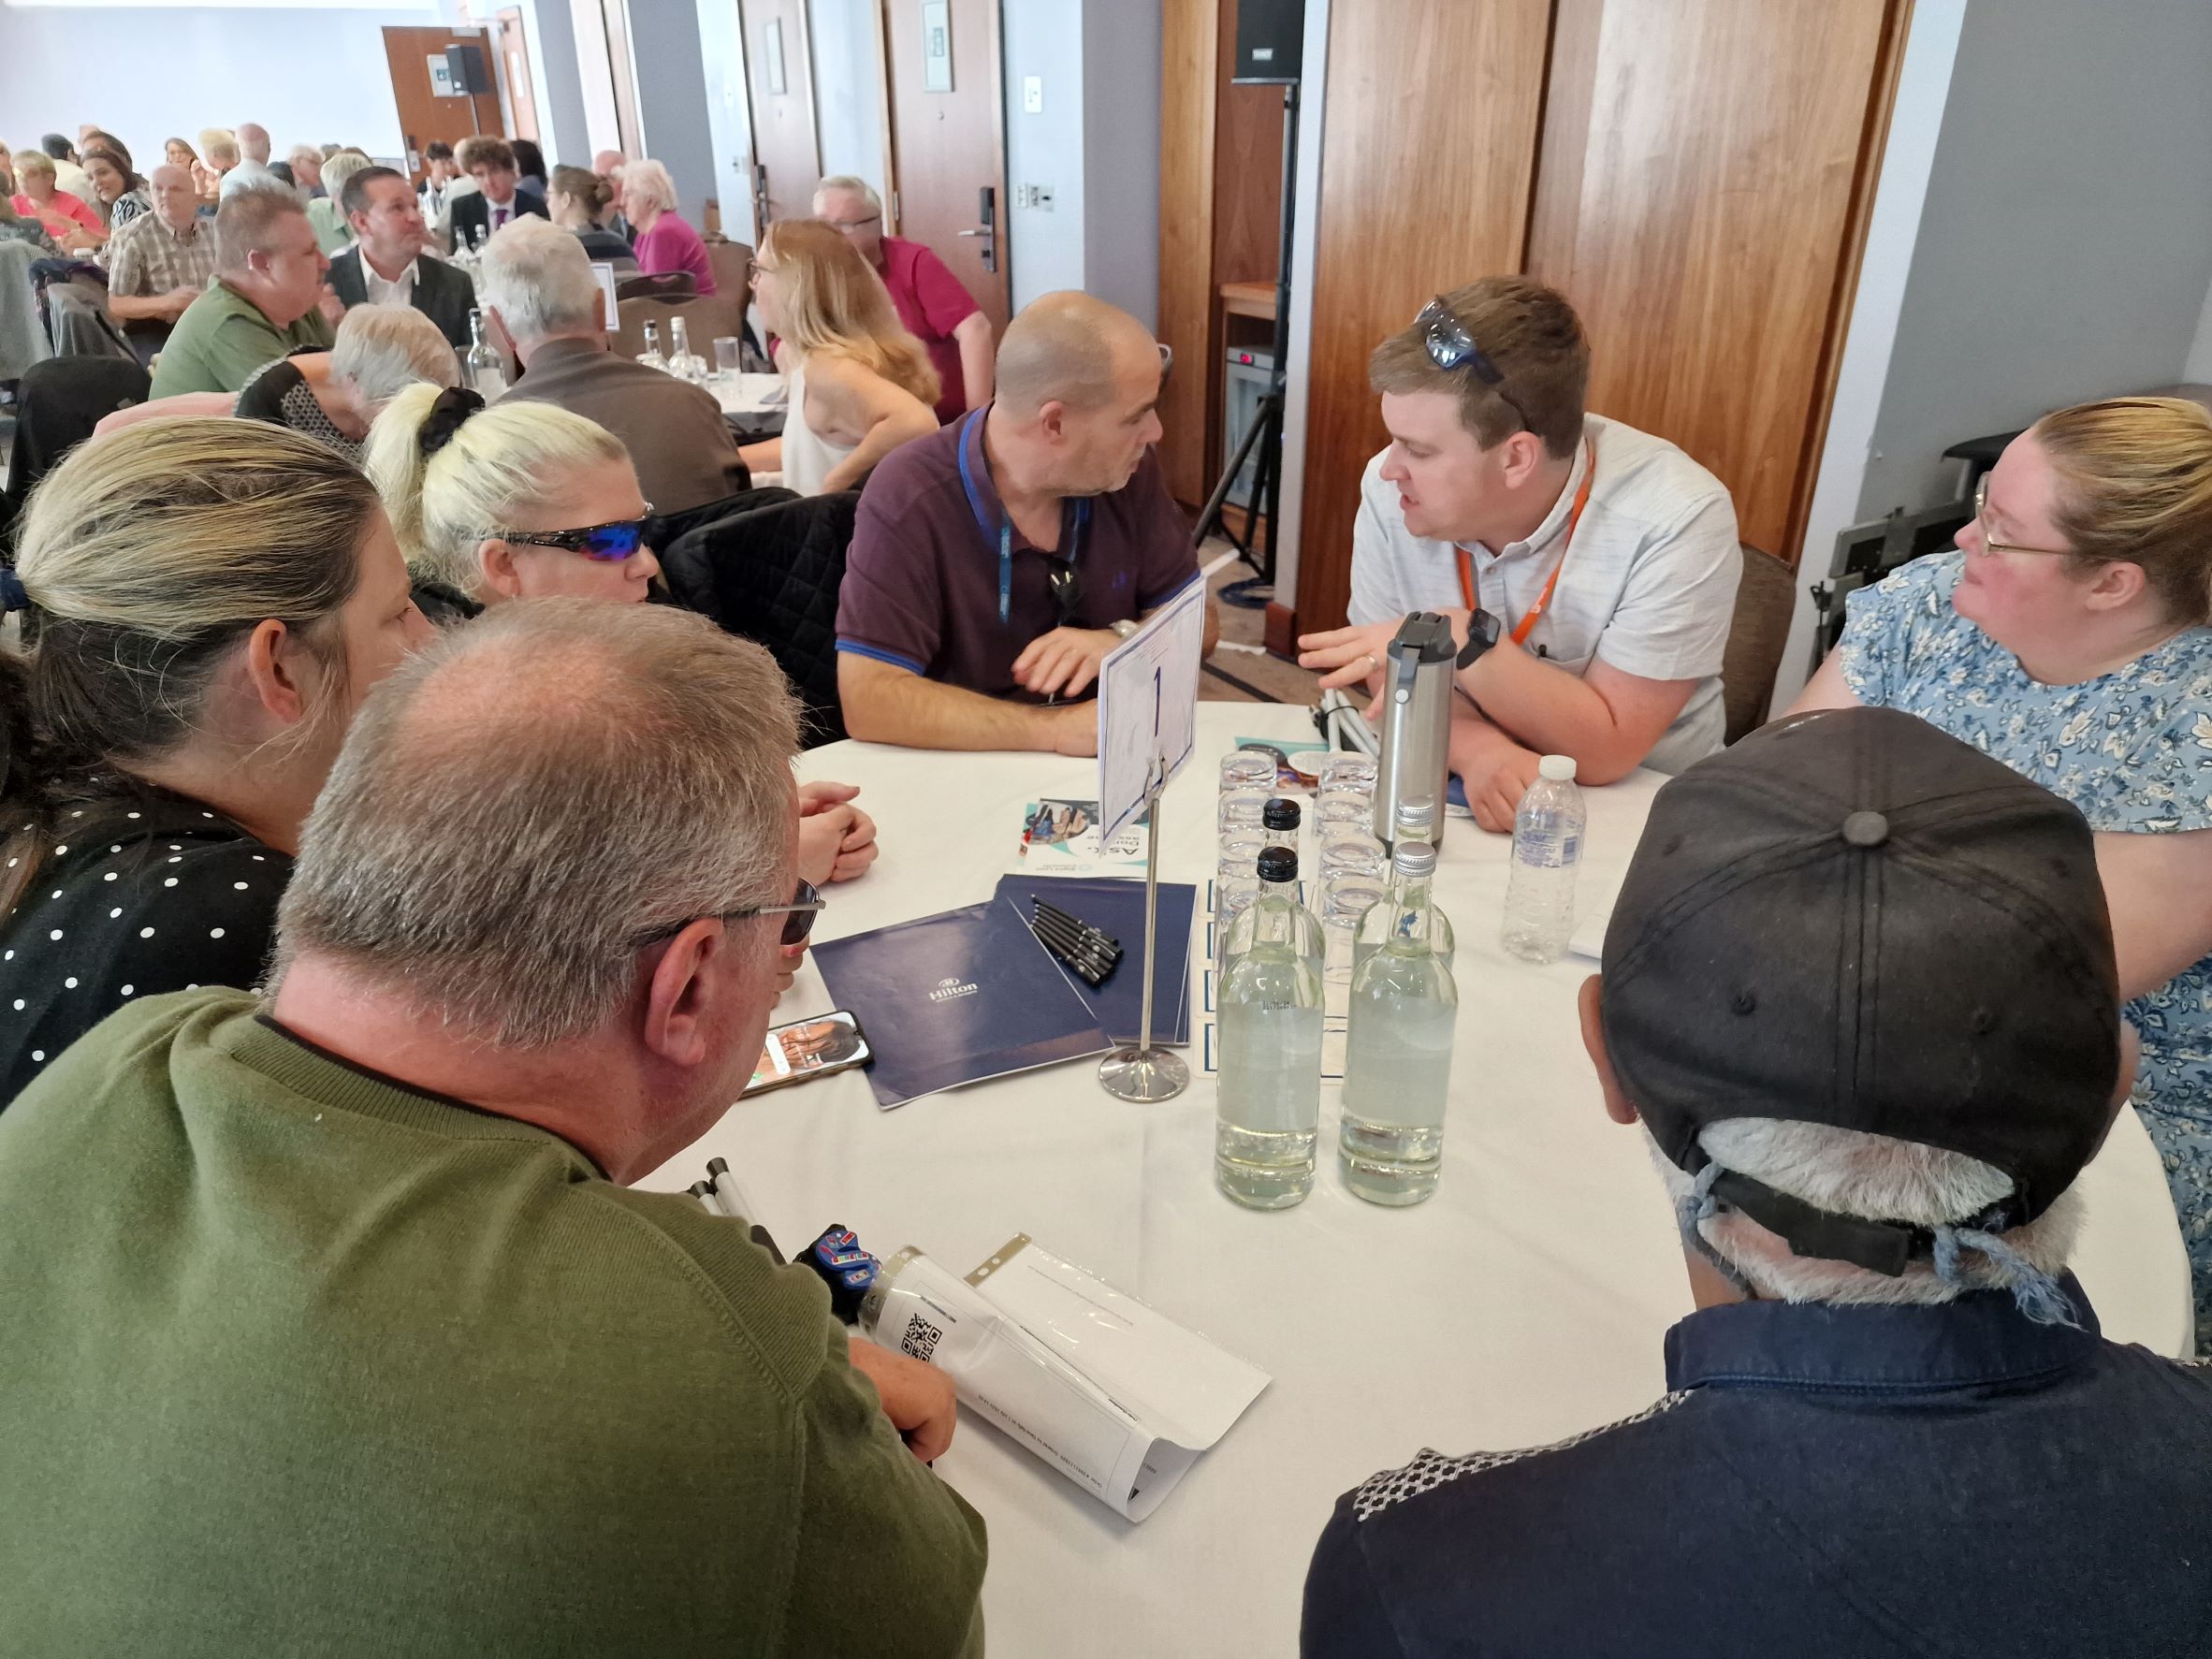 Blind and partially sighted attendees sat around tables discussing key topics focused on employment, transport, health and wellbeing, and accessibility.